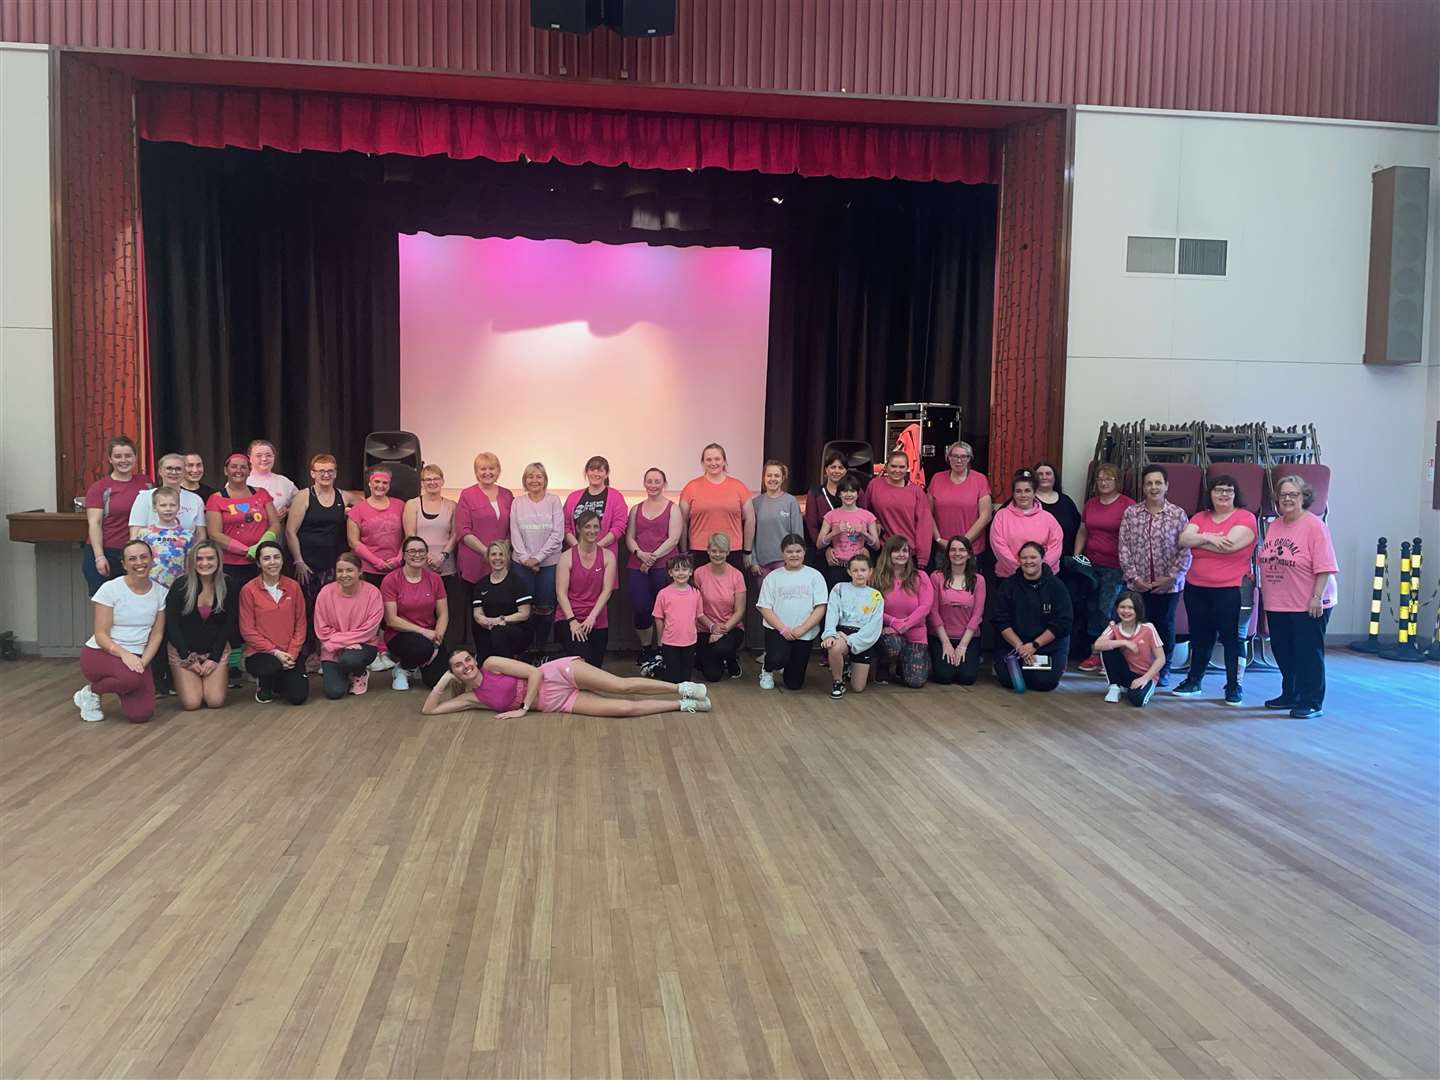 The zumba dance class in Wick raised over £500 for the breast cancer charity. Stephanie is on the floor at the front of the group.